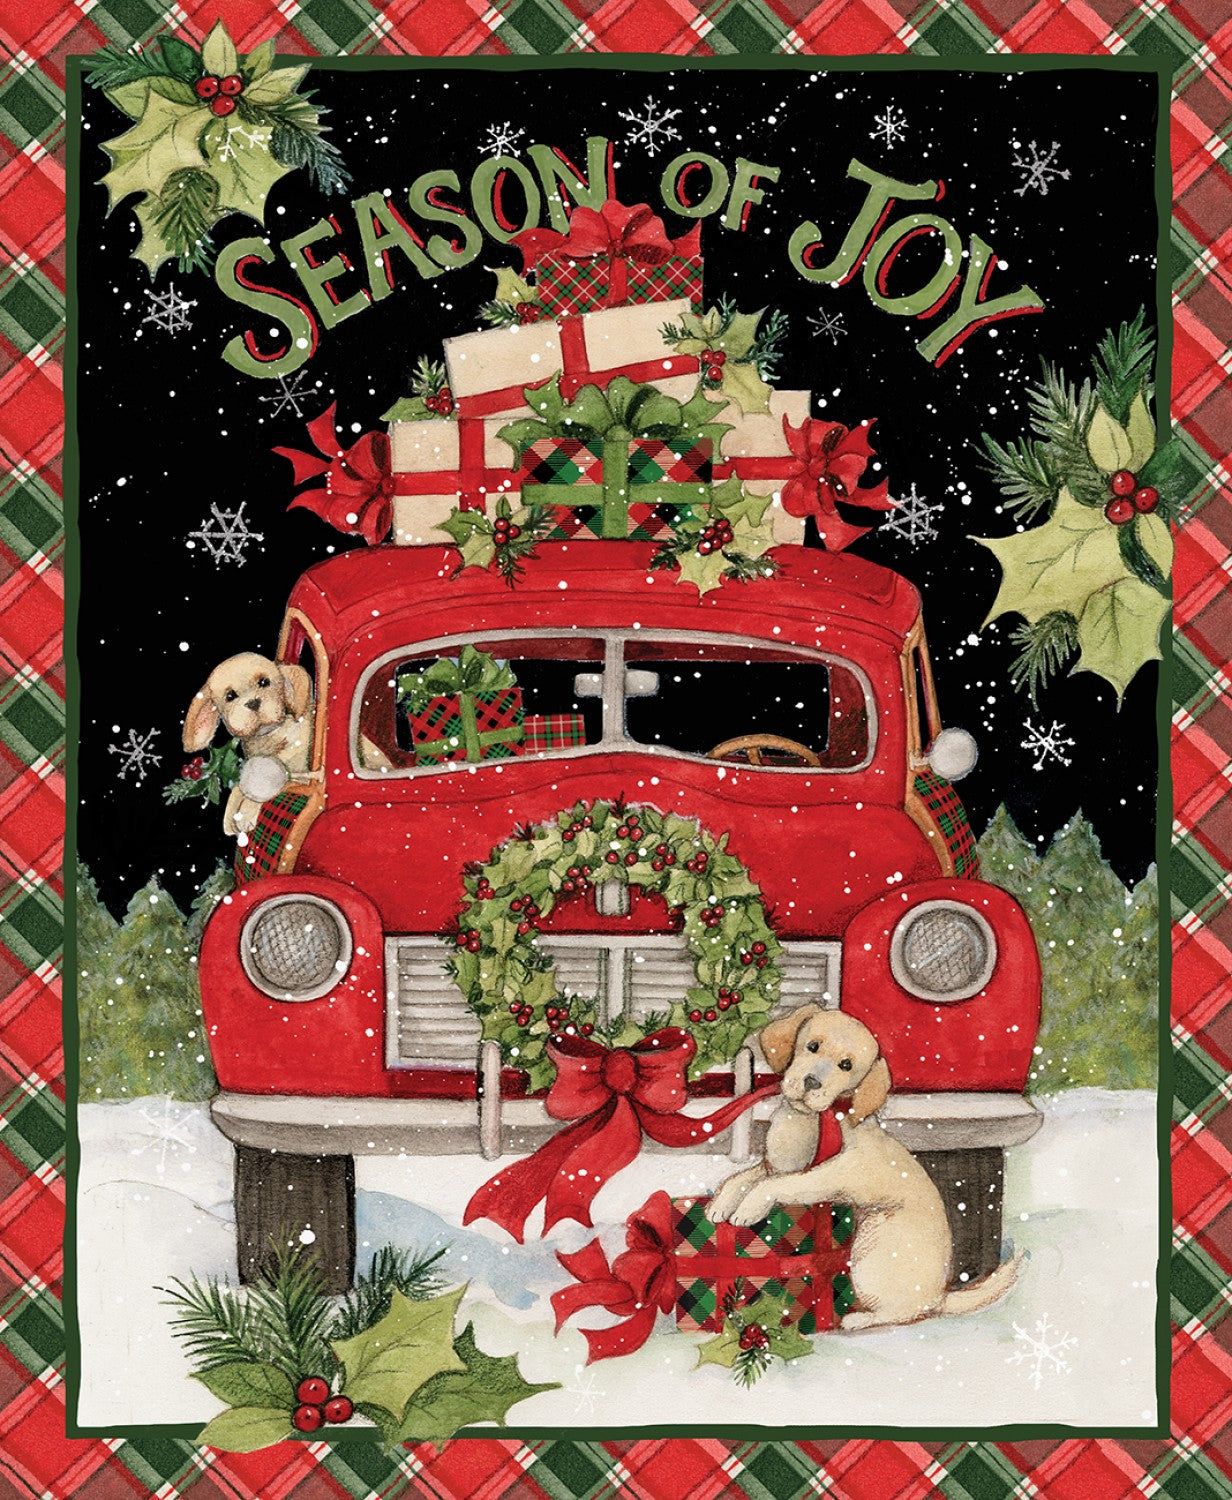 Christmas Panel Quilt - Season of Joy with Dogs